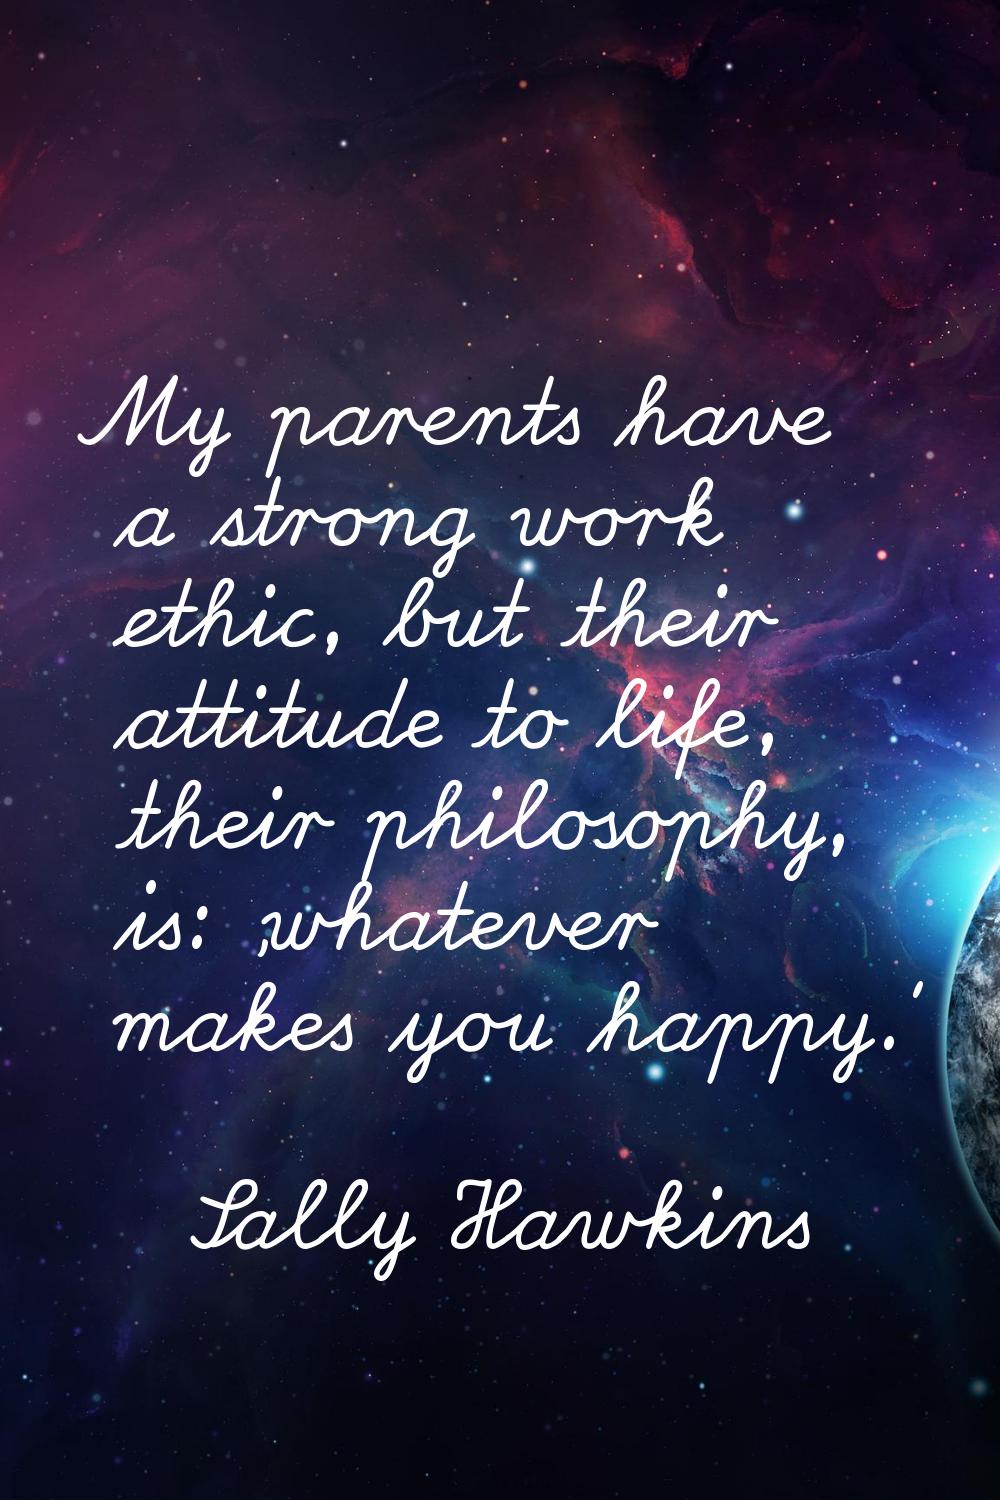 My parents have a strong work ethic, but their attitude to life, their philosophy, is: 'whatever ma